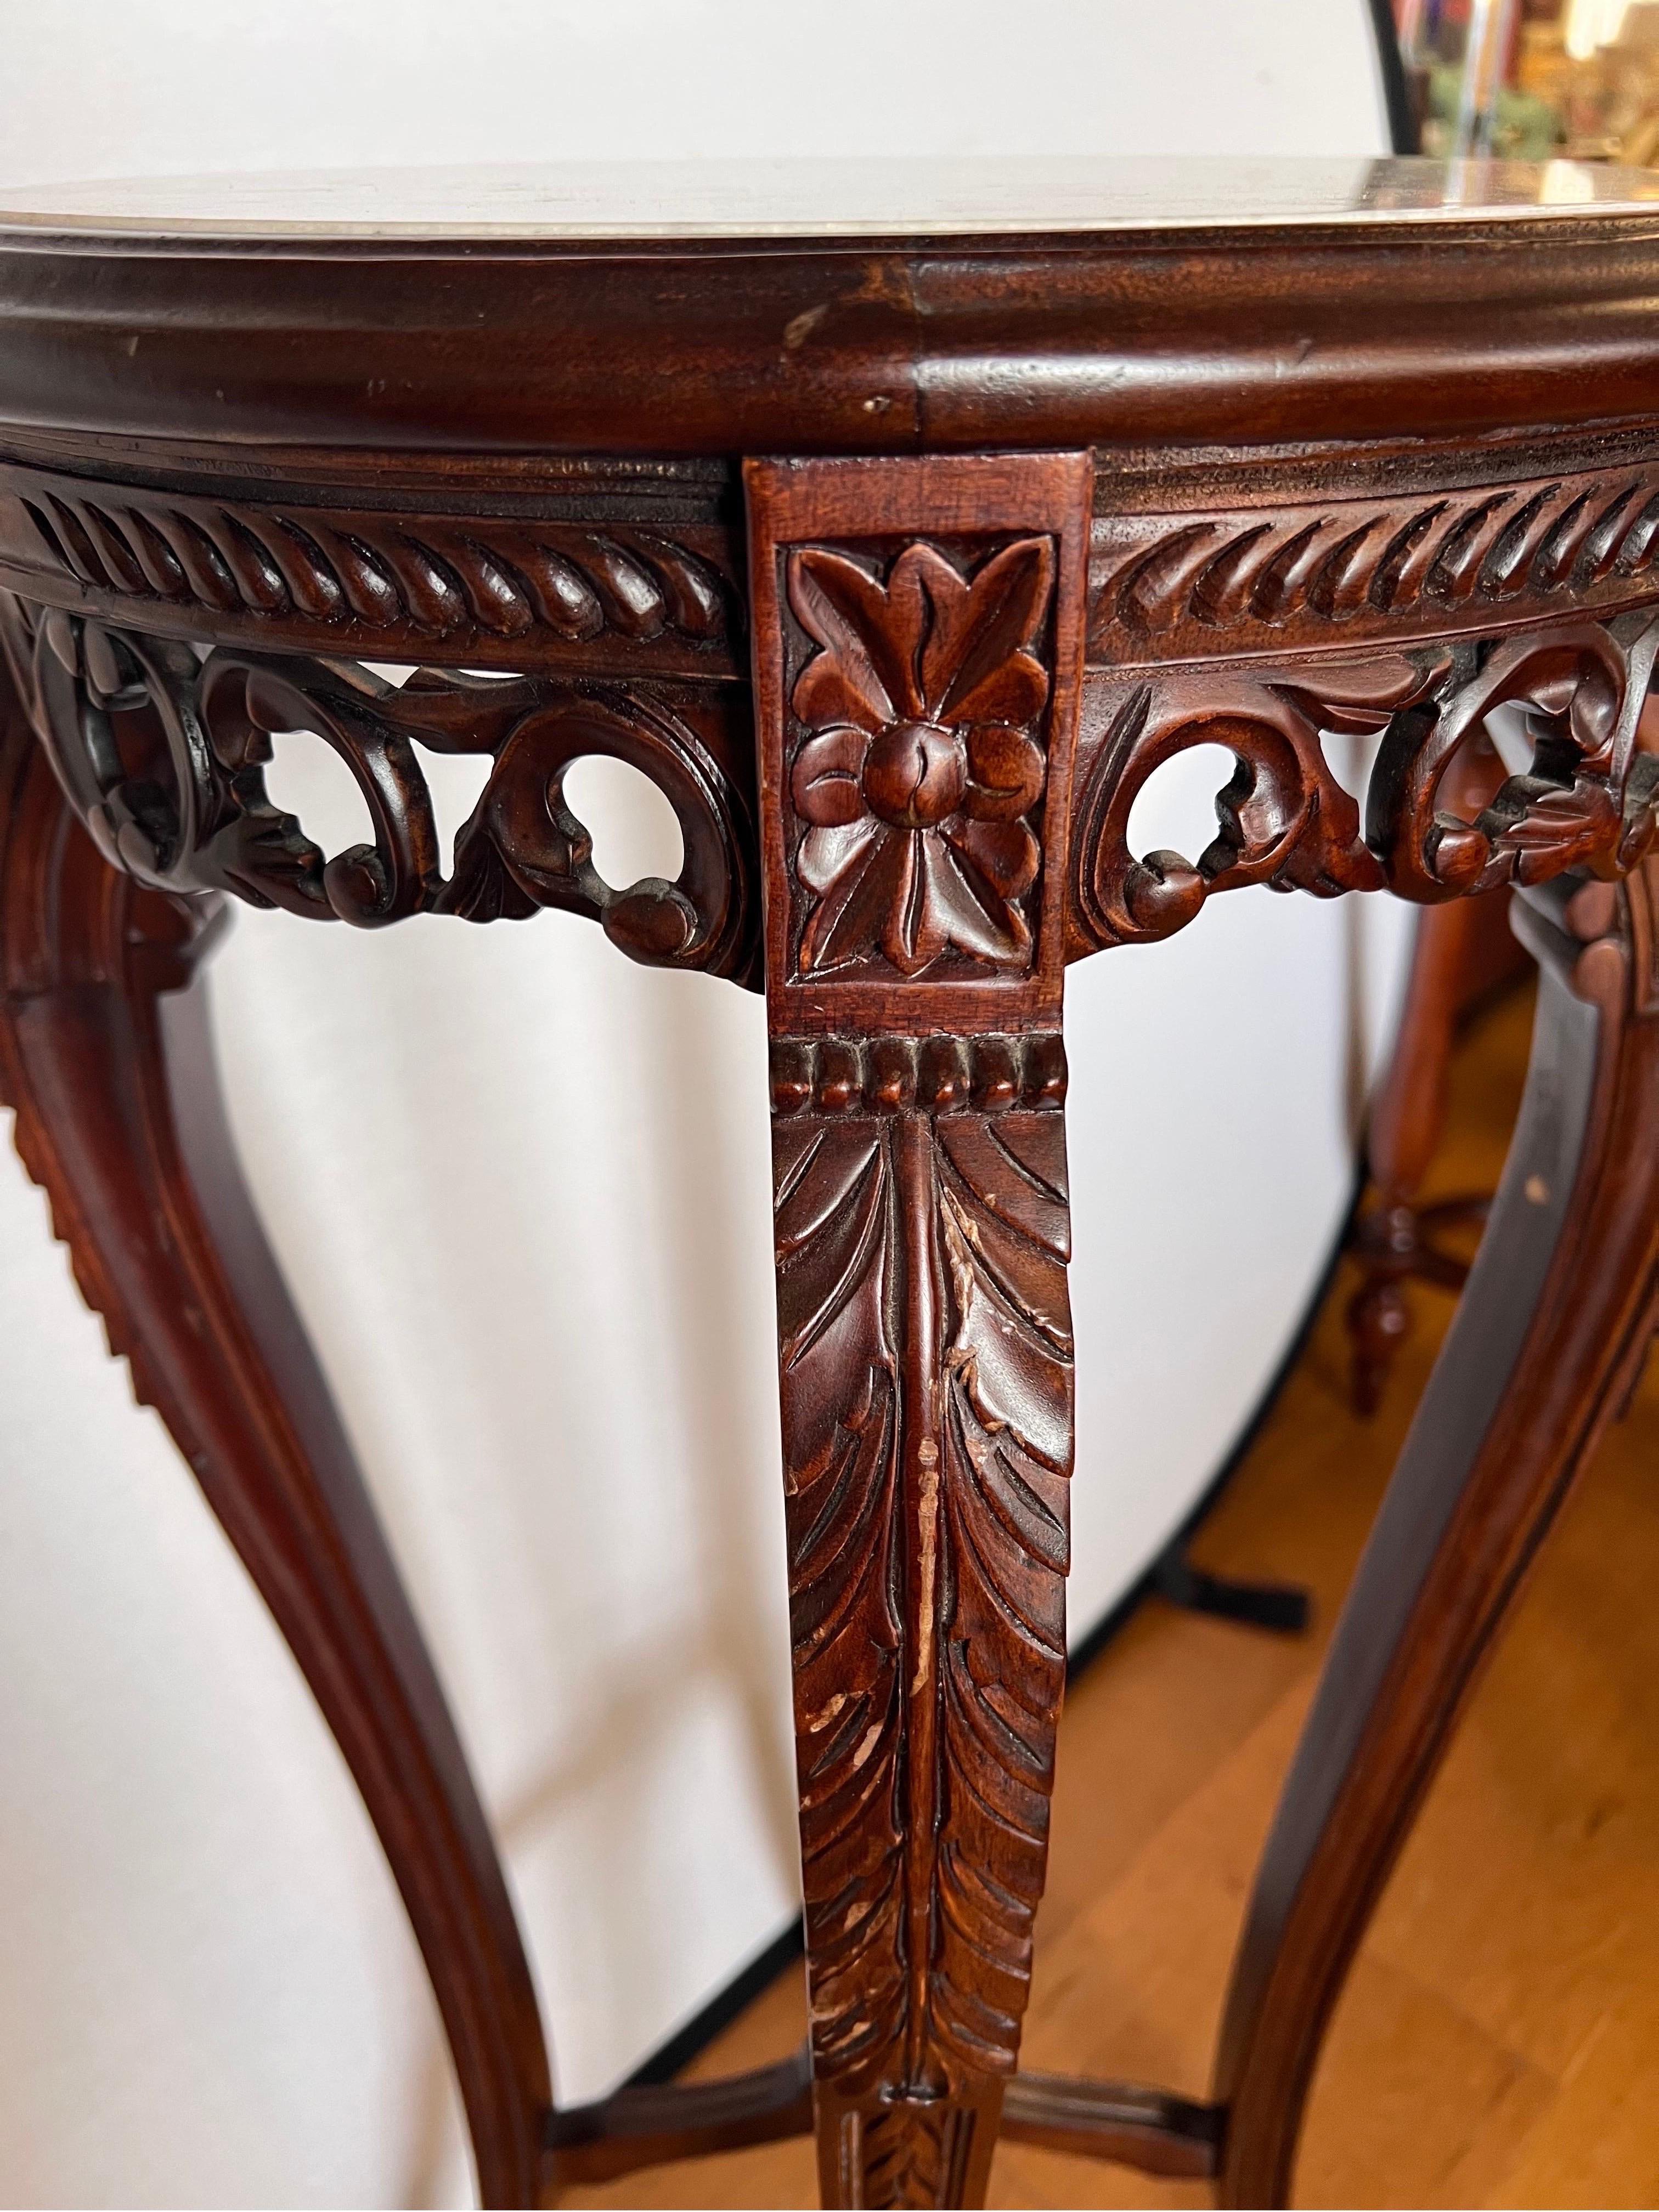 This exceptional piece showcases the artistry of Chinese craftsmanship and the timeless beauty of rosewood. Intricately carved details adorn the pedestal.